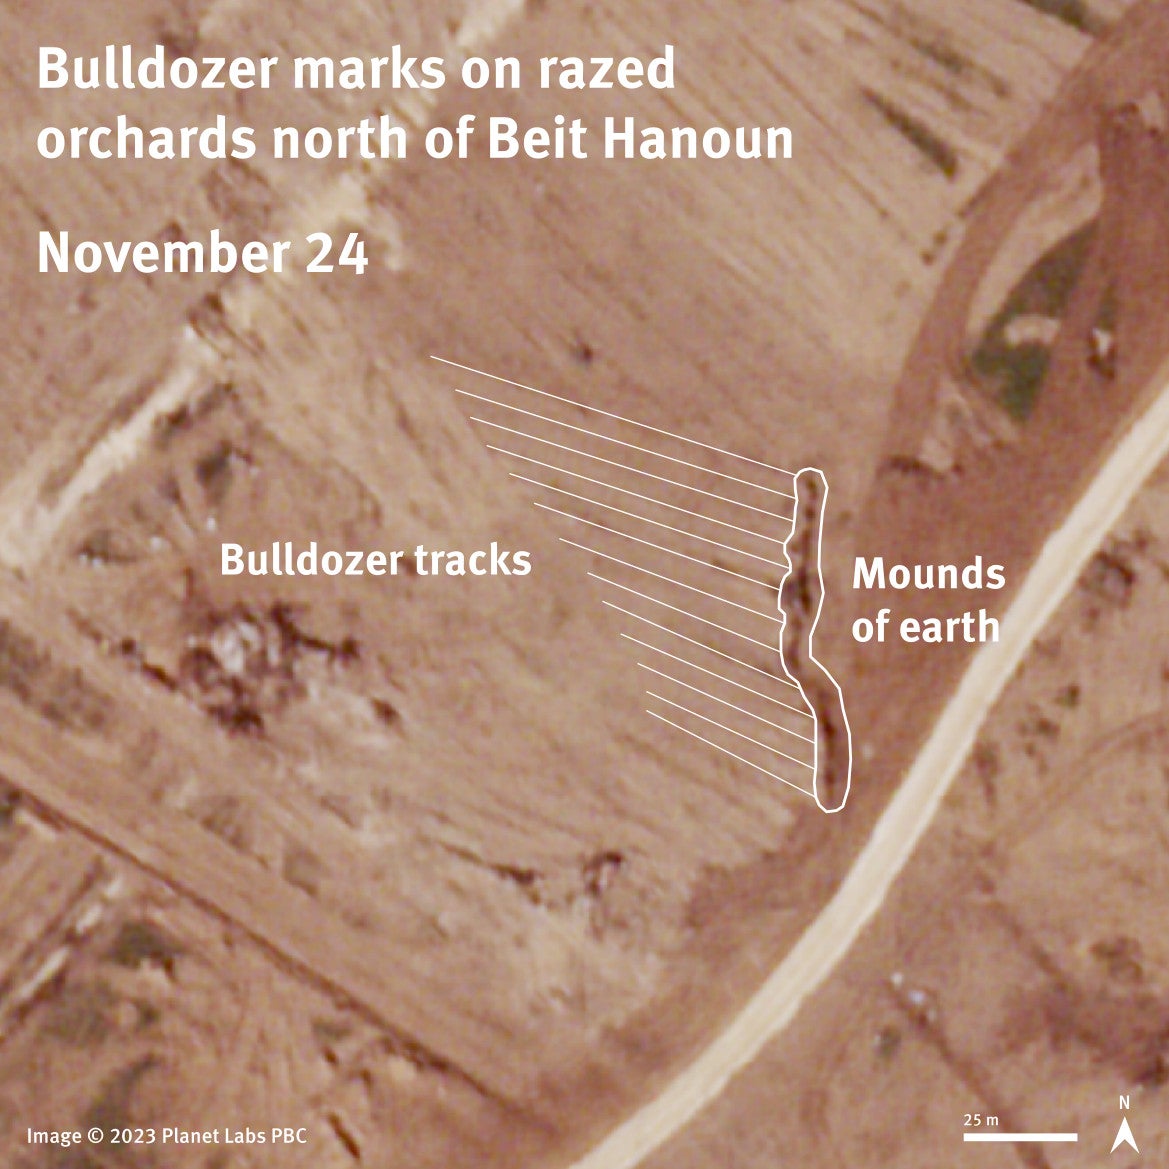 Satellite imagery from November 24, 2023 shows bulldozer marks on razed orchards in an area north of Beit Hanoun.